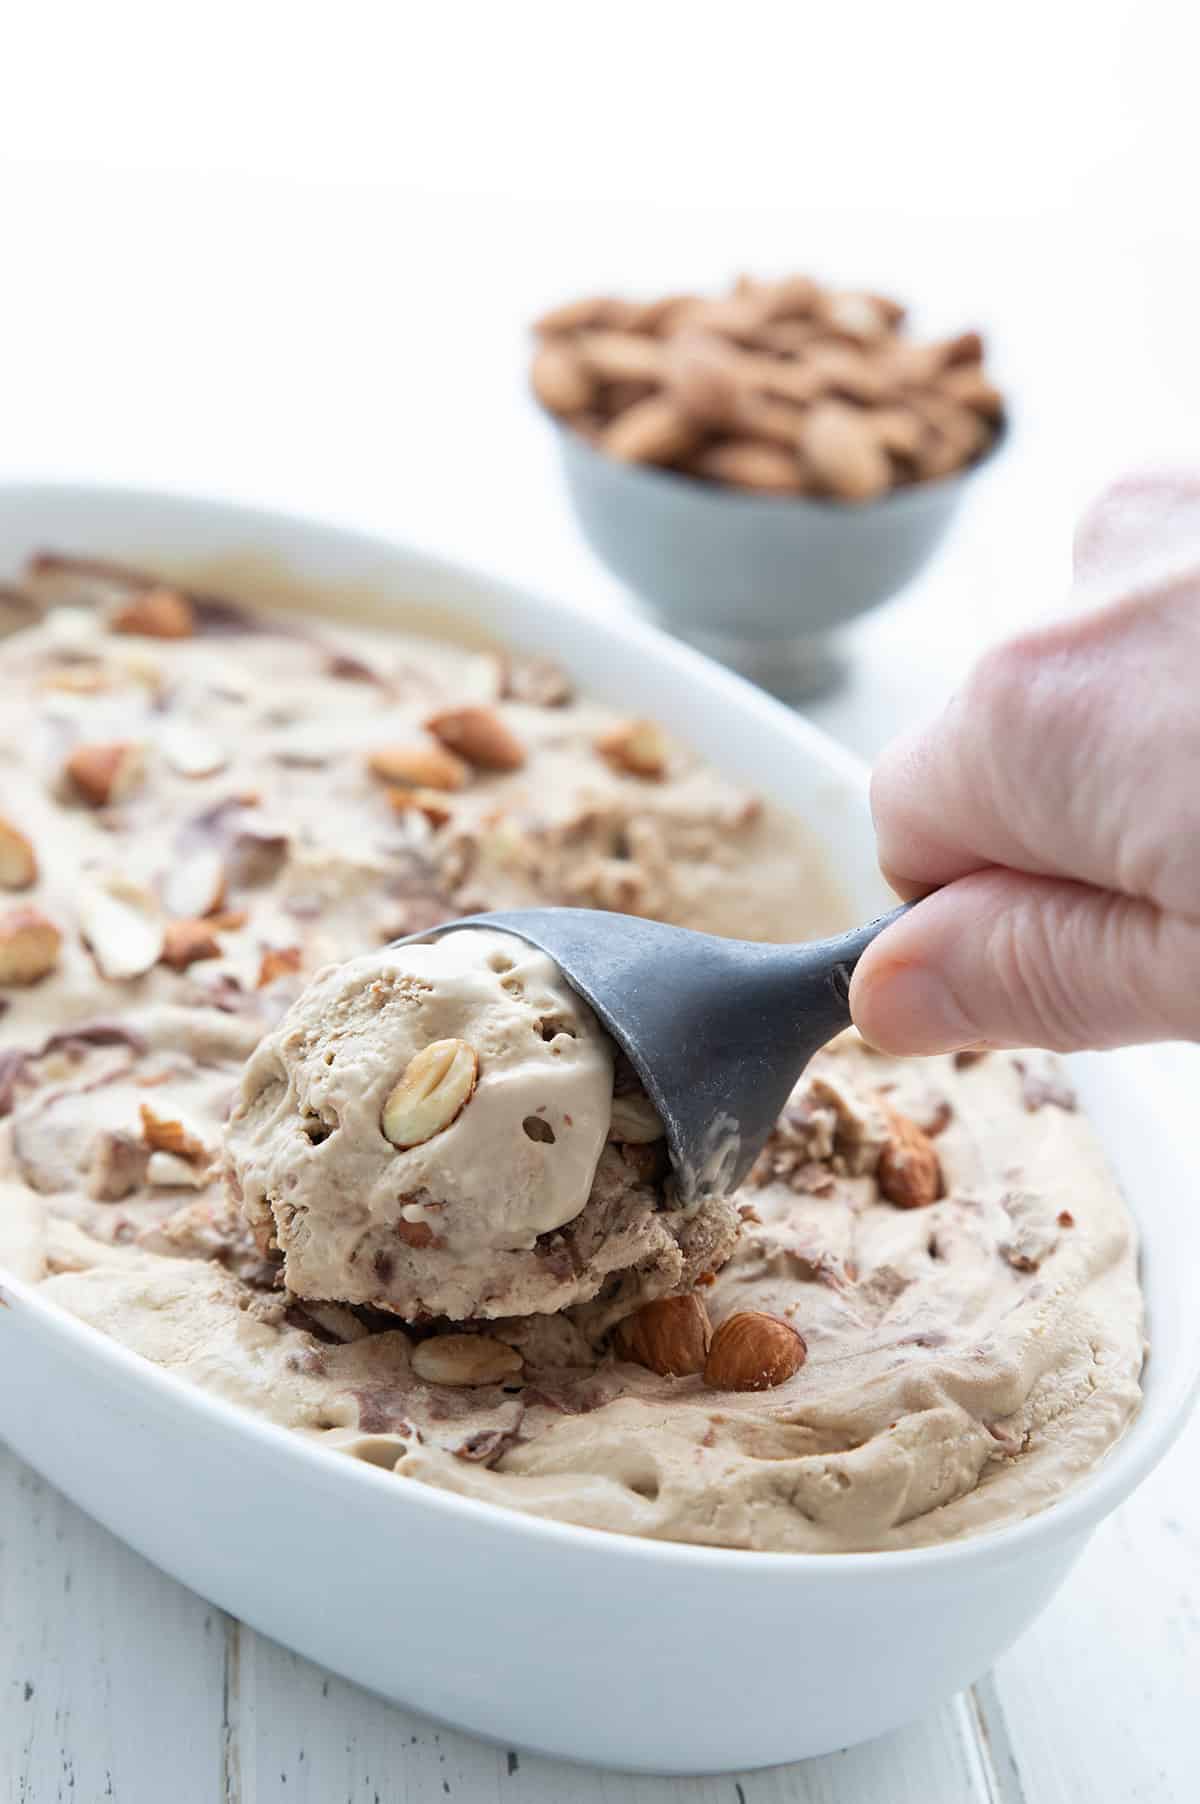 Keto Jamoca Almond Fudge Ice Cream being scooped out of a white oval dish with an ice cream scoop.